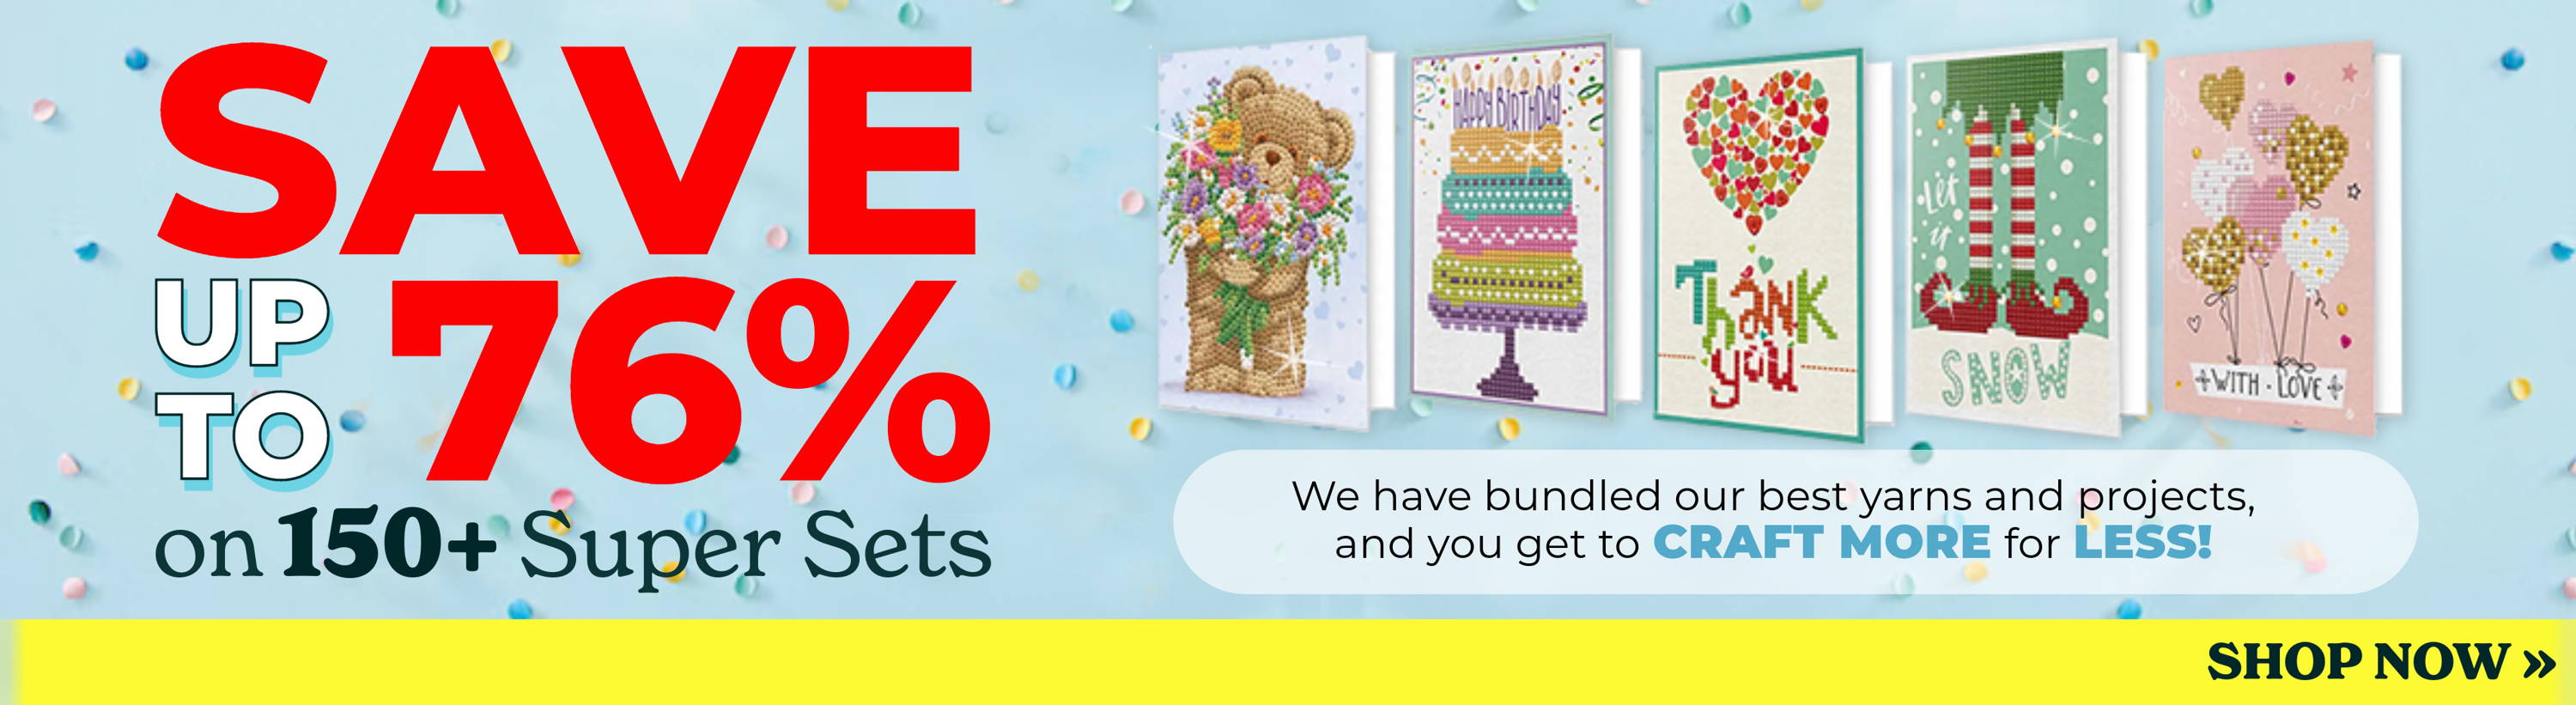 Save Up to 76% on 150+ Super Sets. Image: Featured Card Sets.